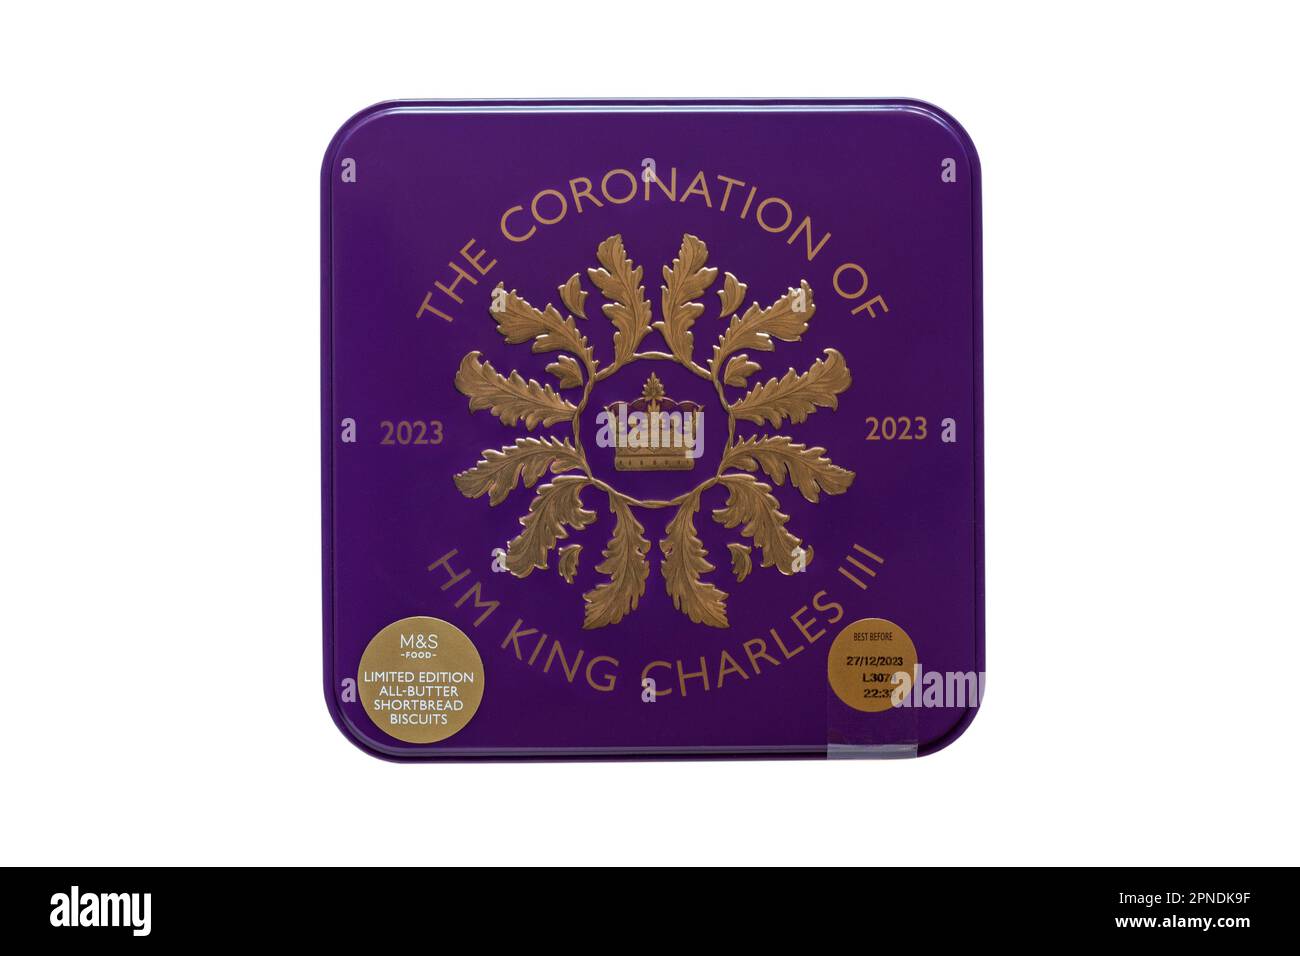 Tin of limited edition all butter shortbread biscuits to commemorate The Coronation of HM King Charles III 2023 from M&S isolated on white background Stock Photo